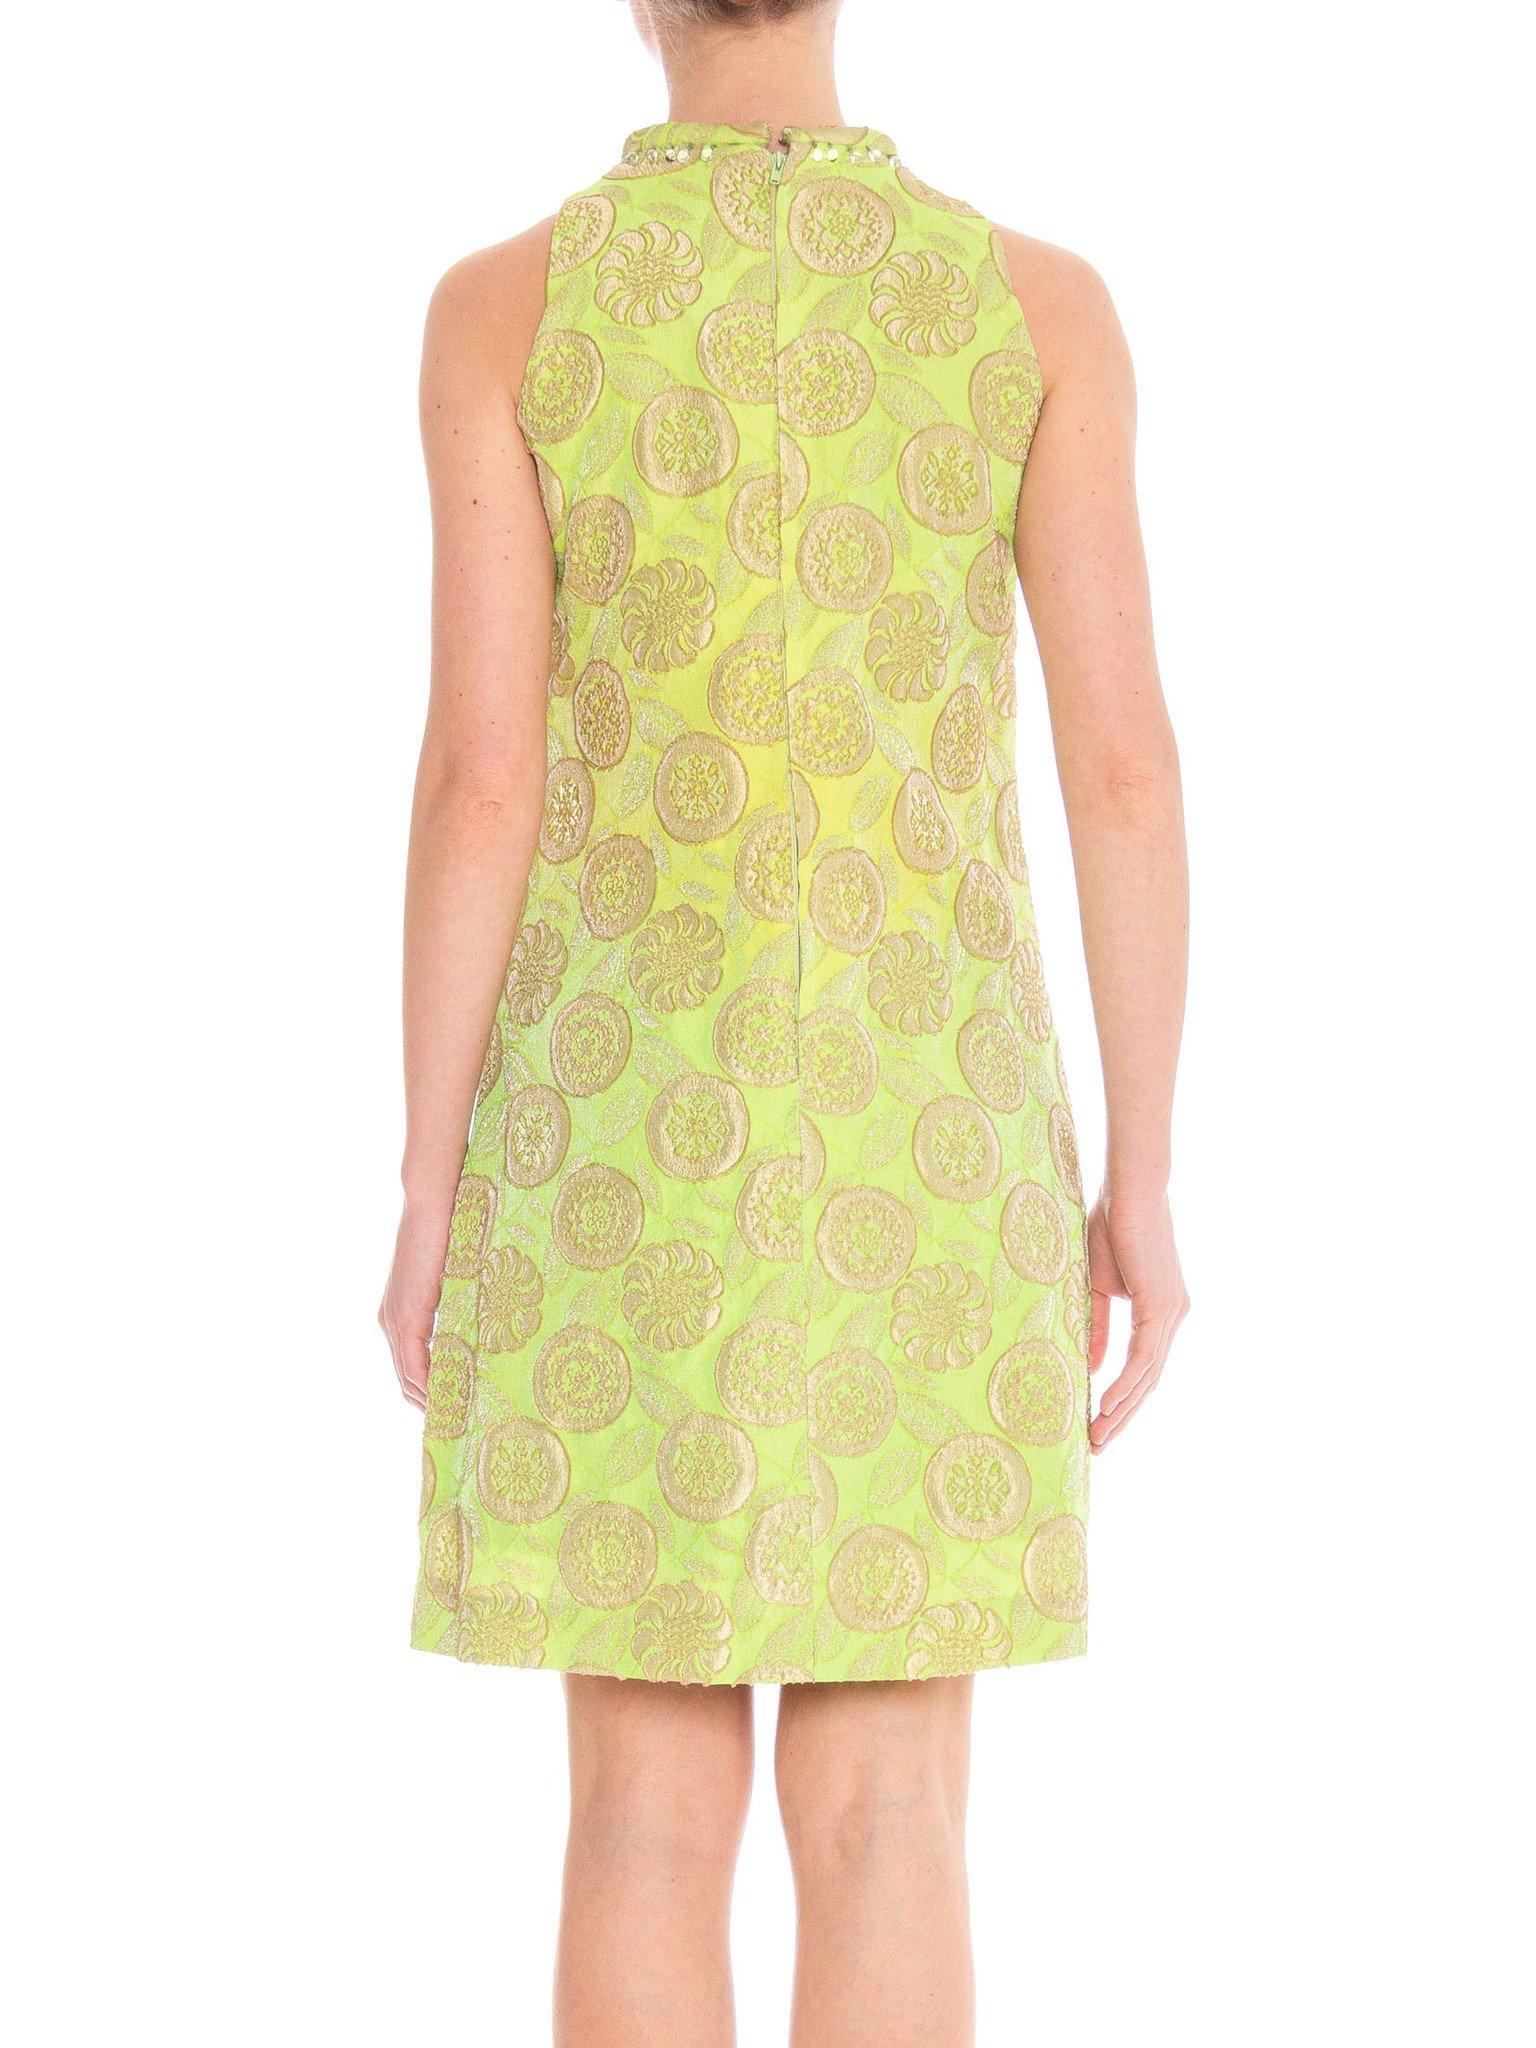 Women's 1960S Lime Green Floral Rayon Blend Jacquard Dress For Sale